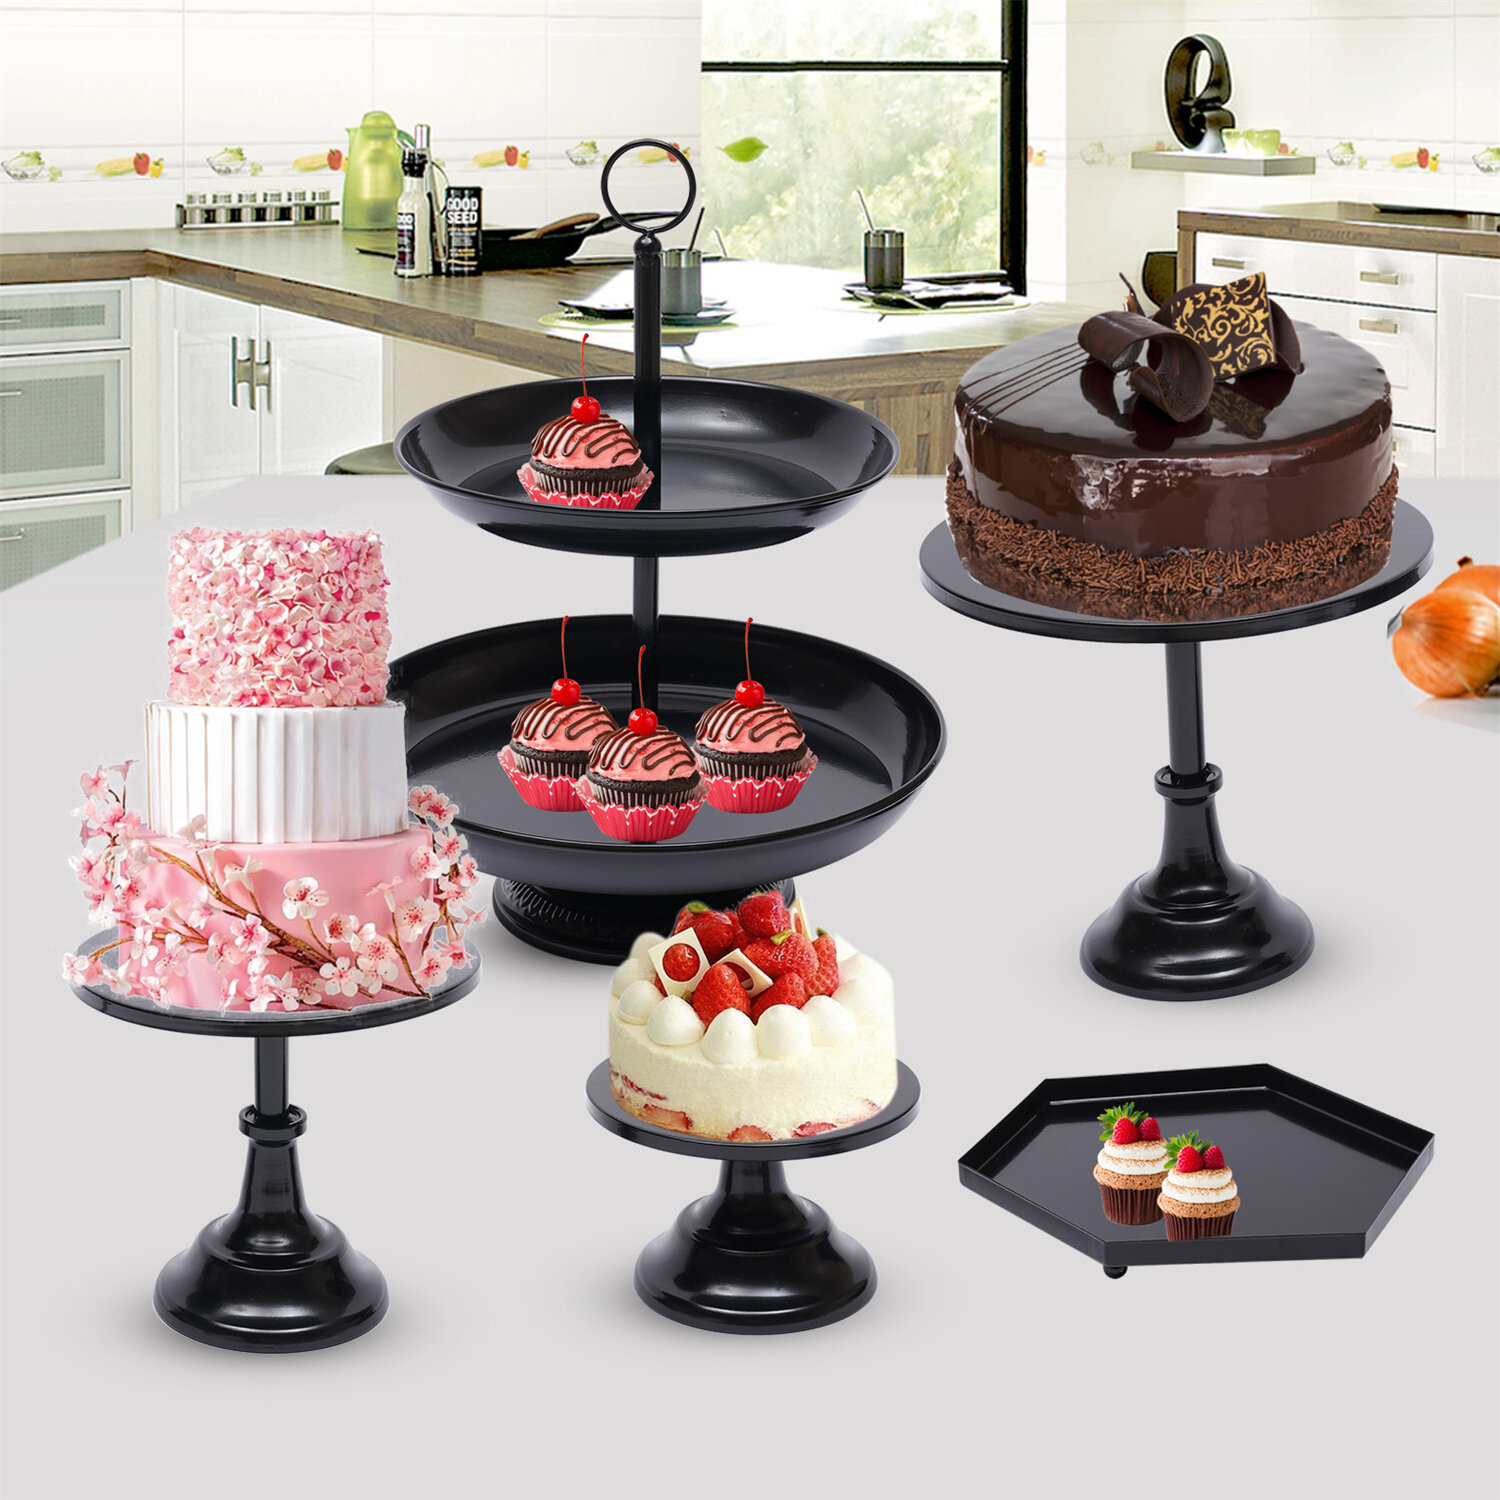 15 Cake Stands Perfect for Displaying Any Dessert